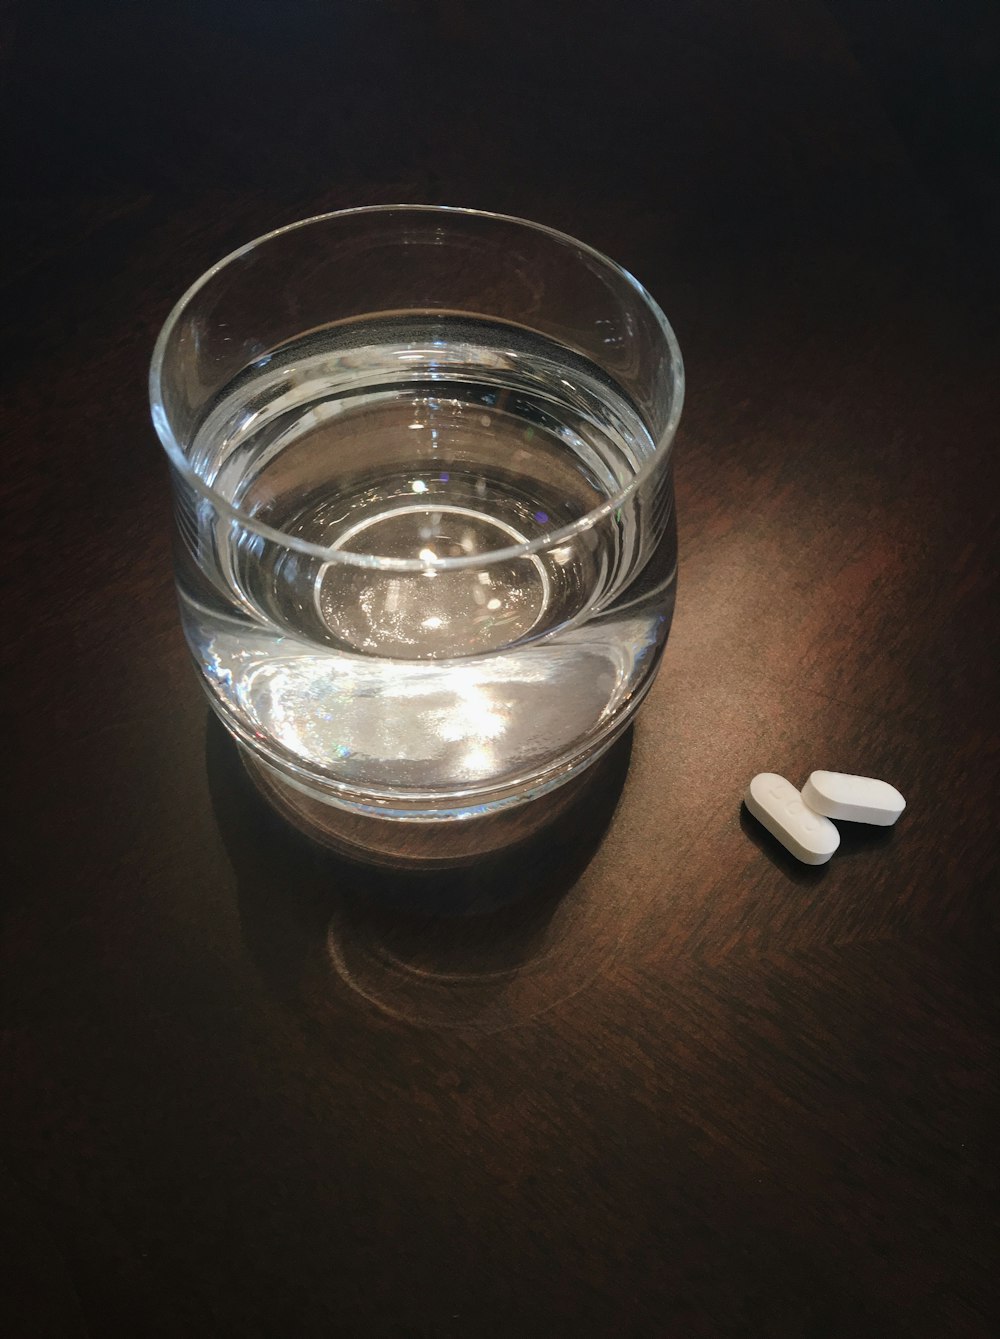 two oval white medication tablets on brown surface